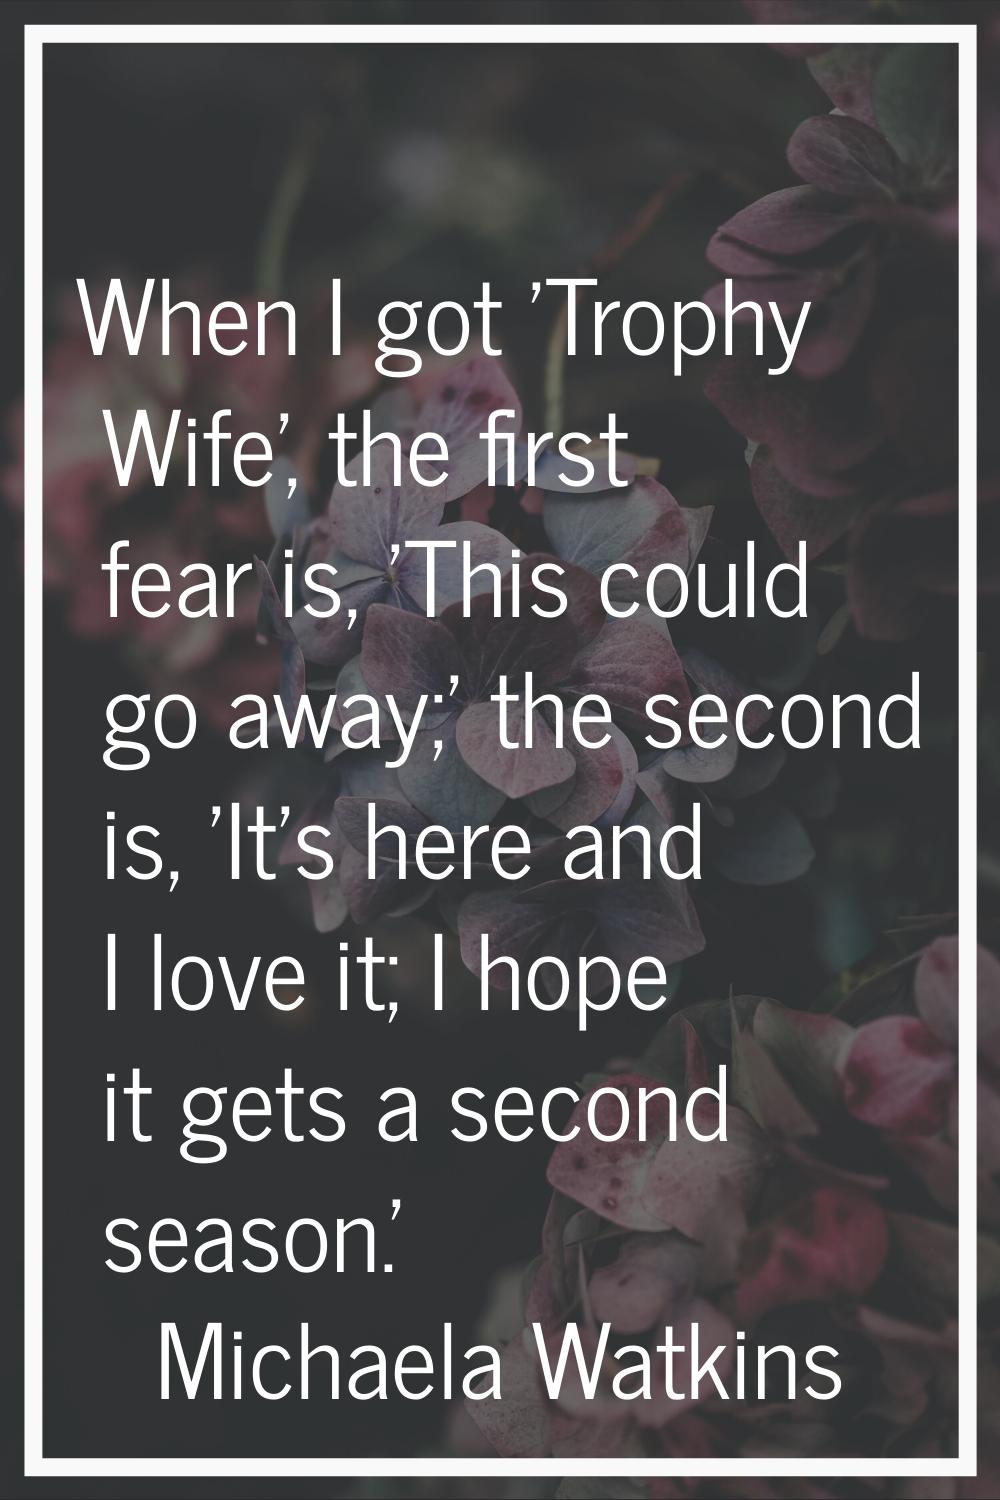 When I got 'Trophy Wife', the first fear is, 'This could go away;' the second is, 'It's here and I 